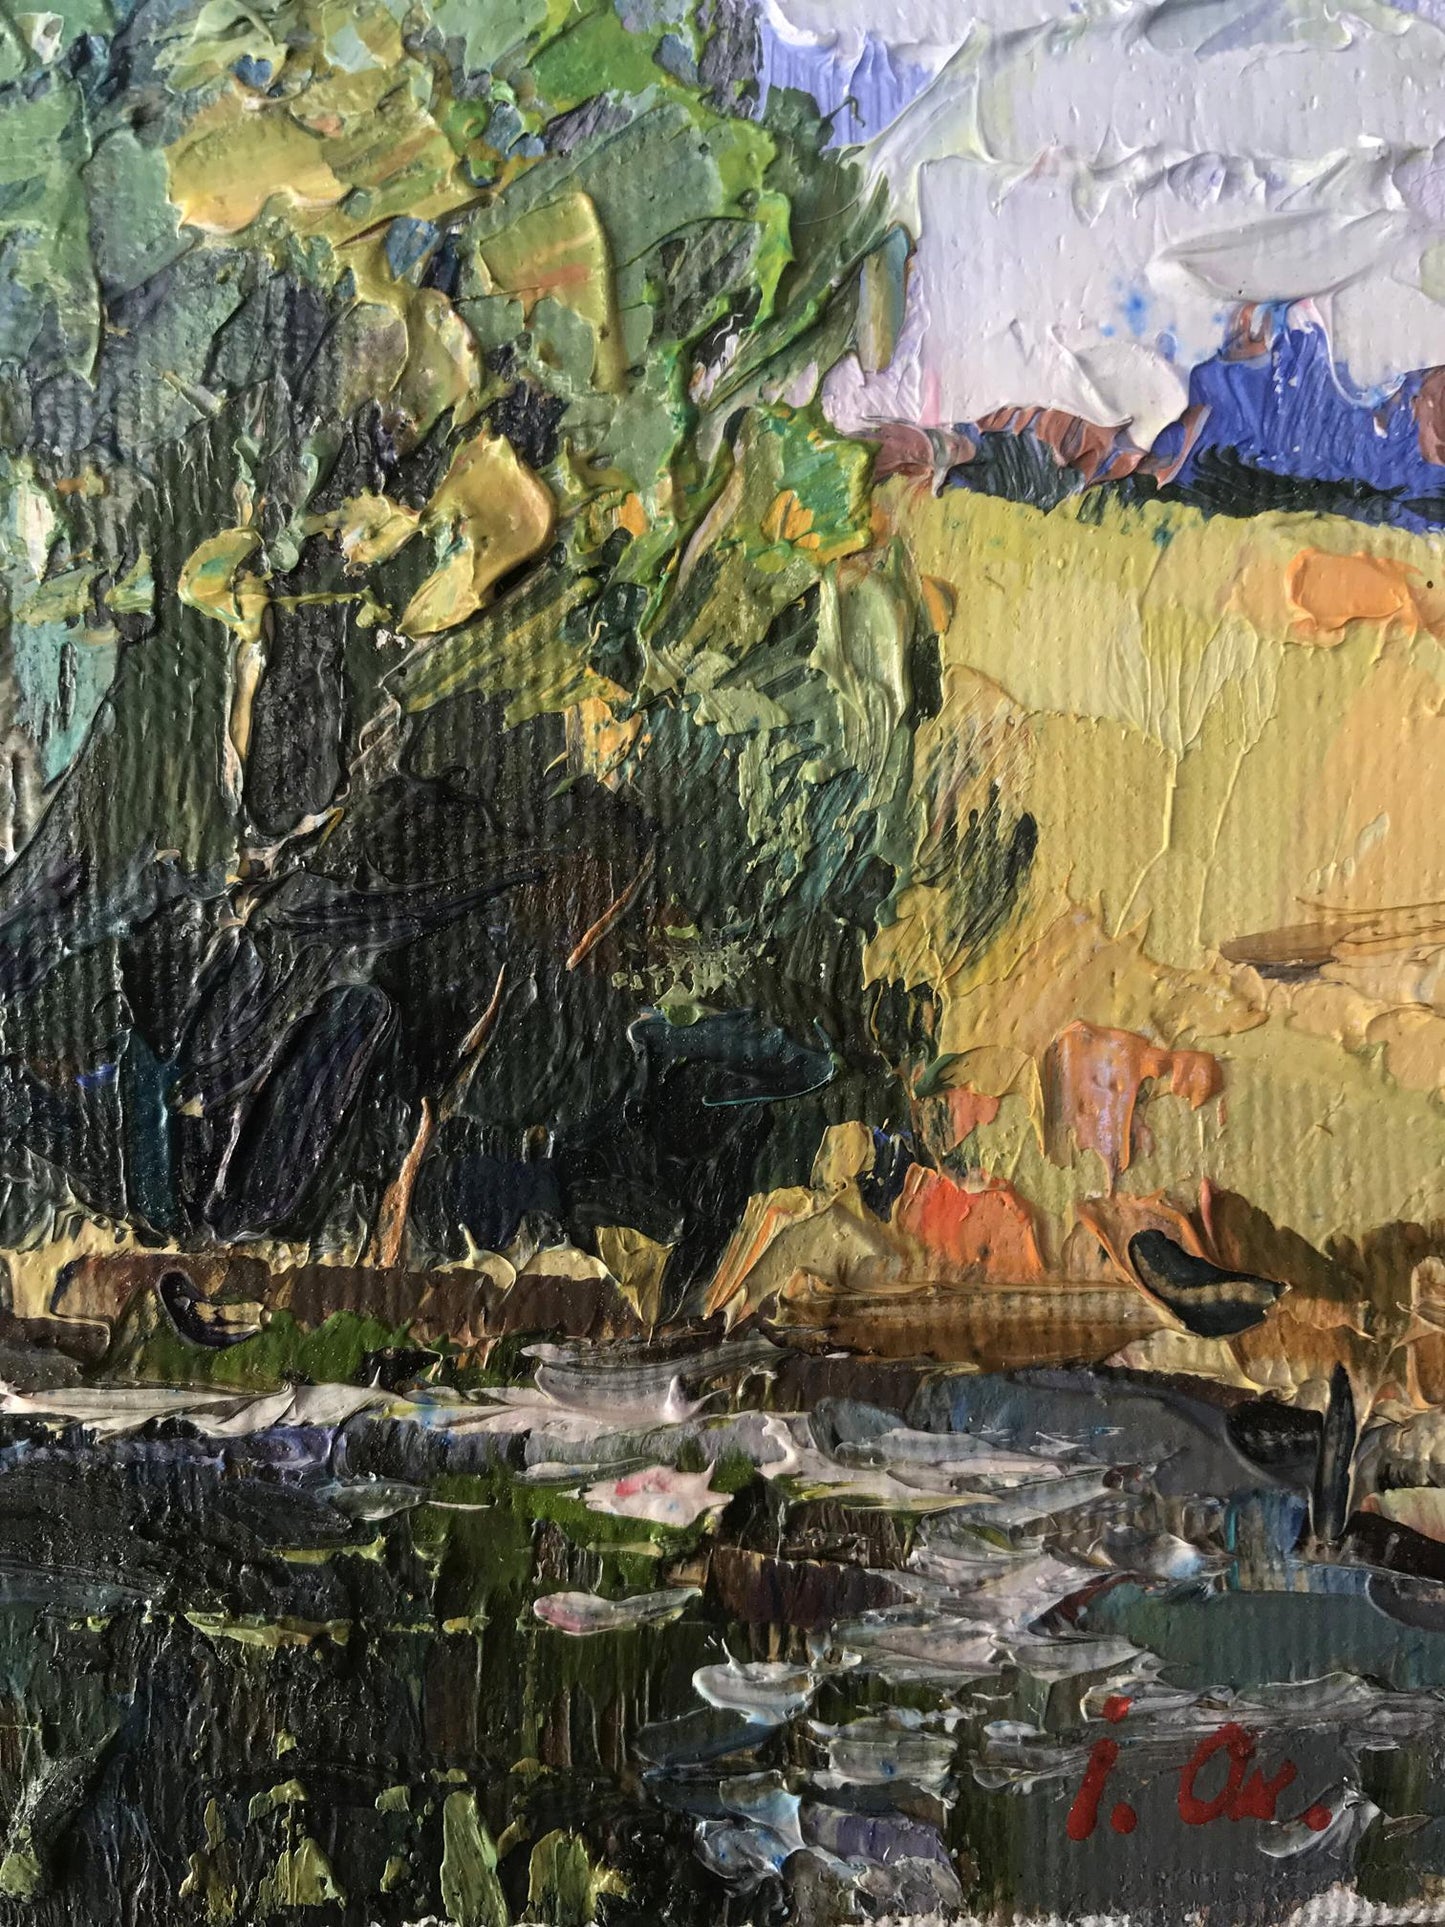 A forest lake secluded from view, depicted in Oksana Ivanyuk's oil painting